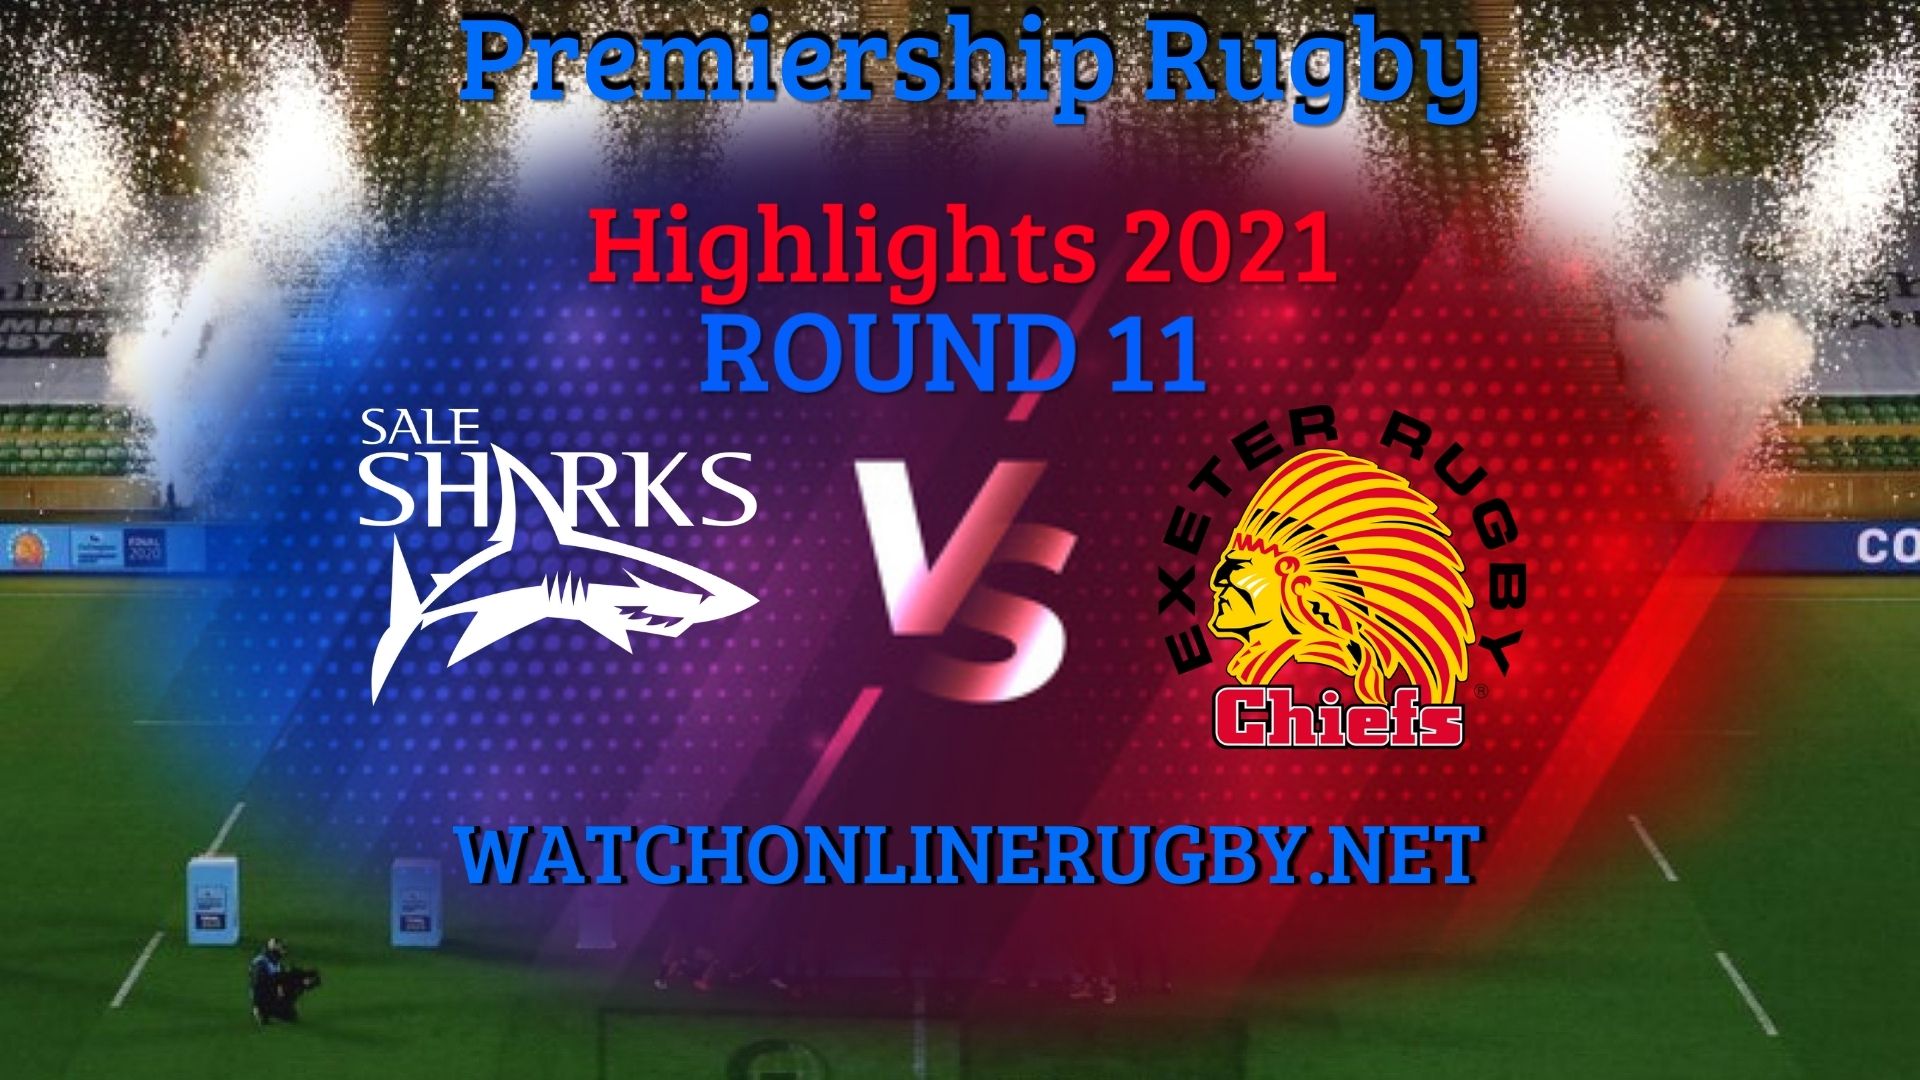 Sale Sharks Vs Exeter Chiefs Premiership Rugby 2021 RD 11